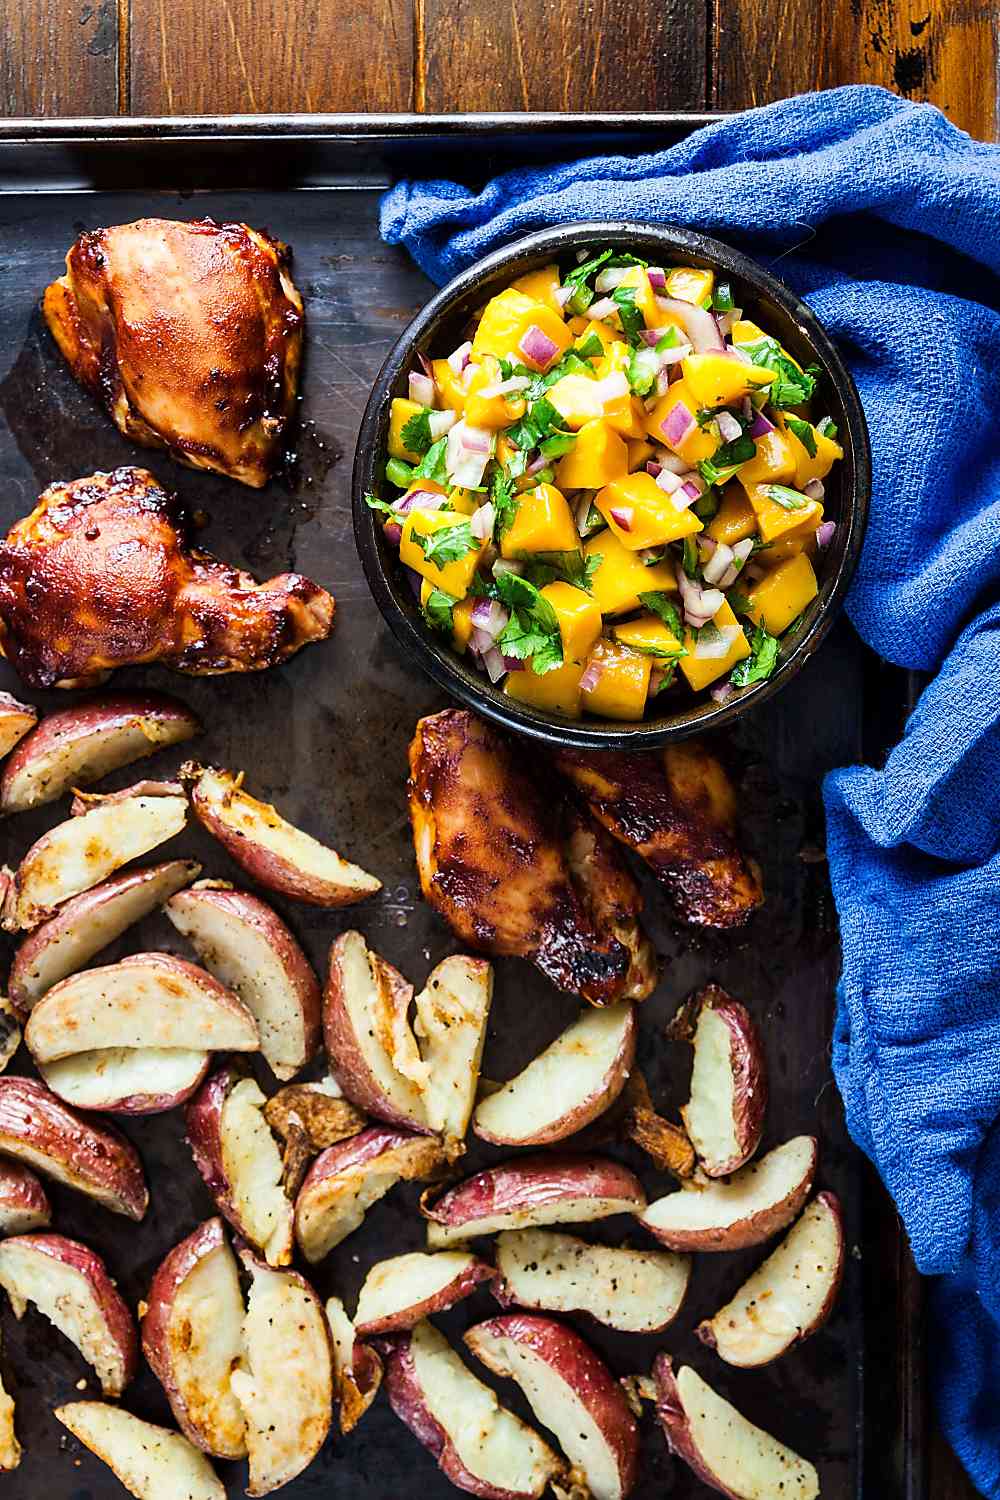 Sheet Pan BBQ Chicken with Mango Salad from Healthy Eating One-Pot Cookbook